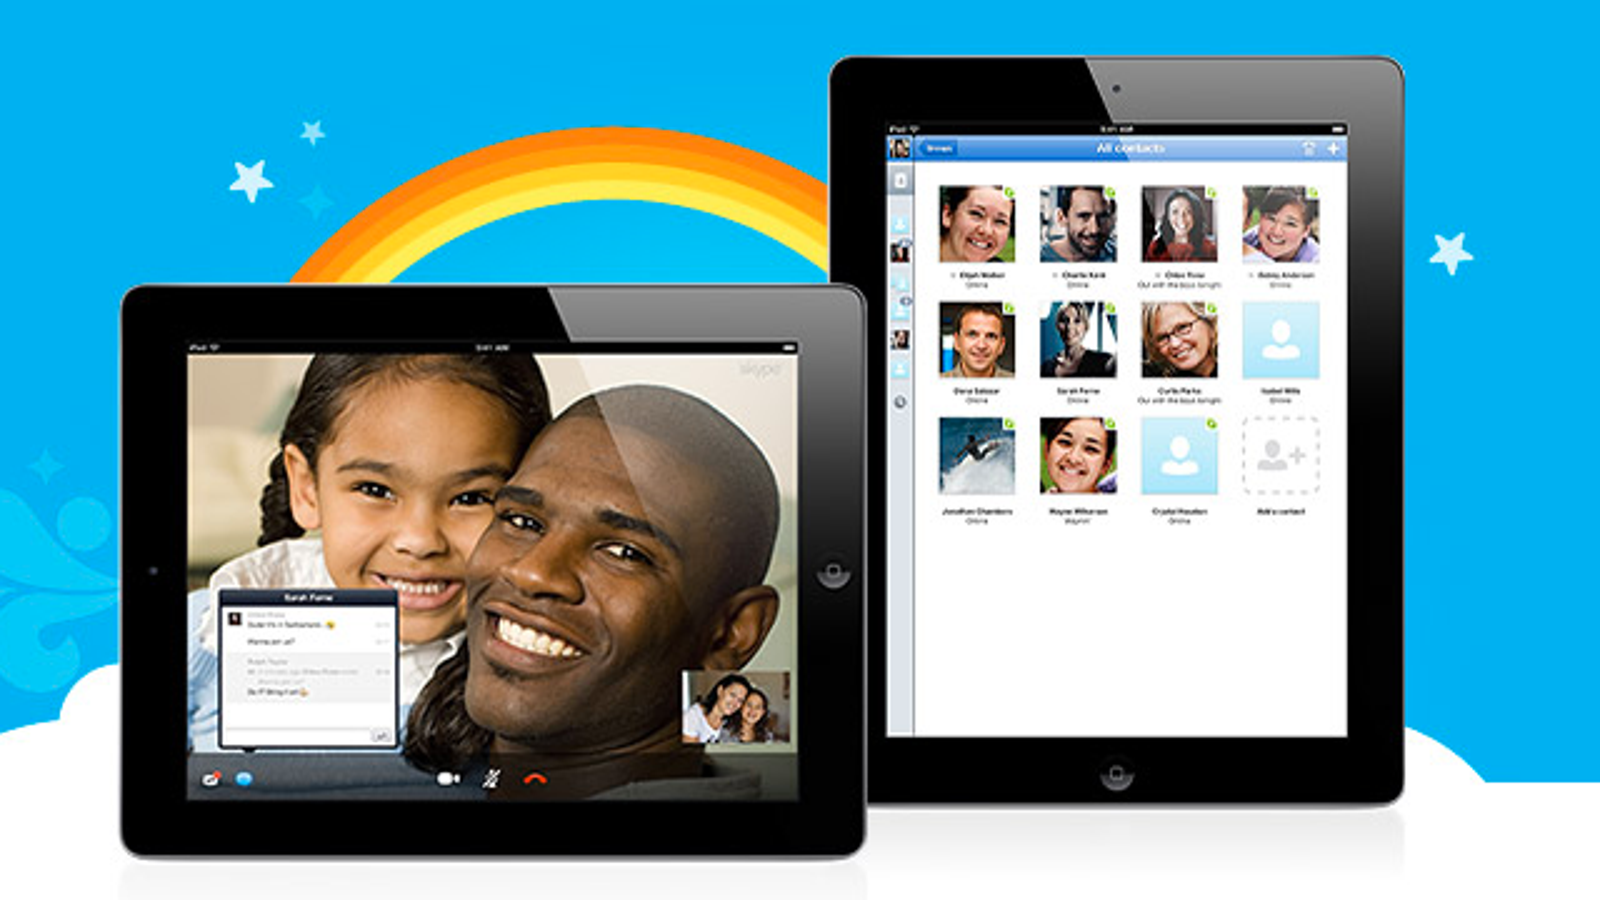 how to make video calls on iphone 4 with skype